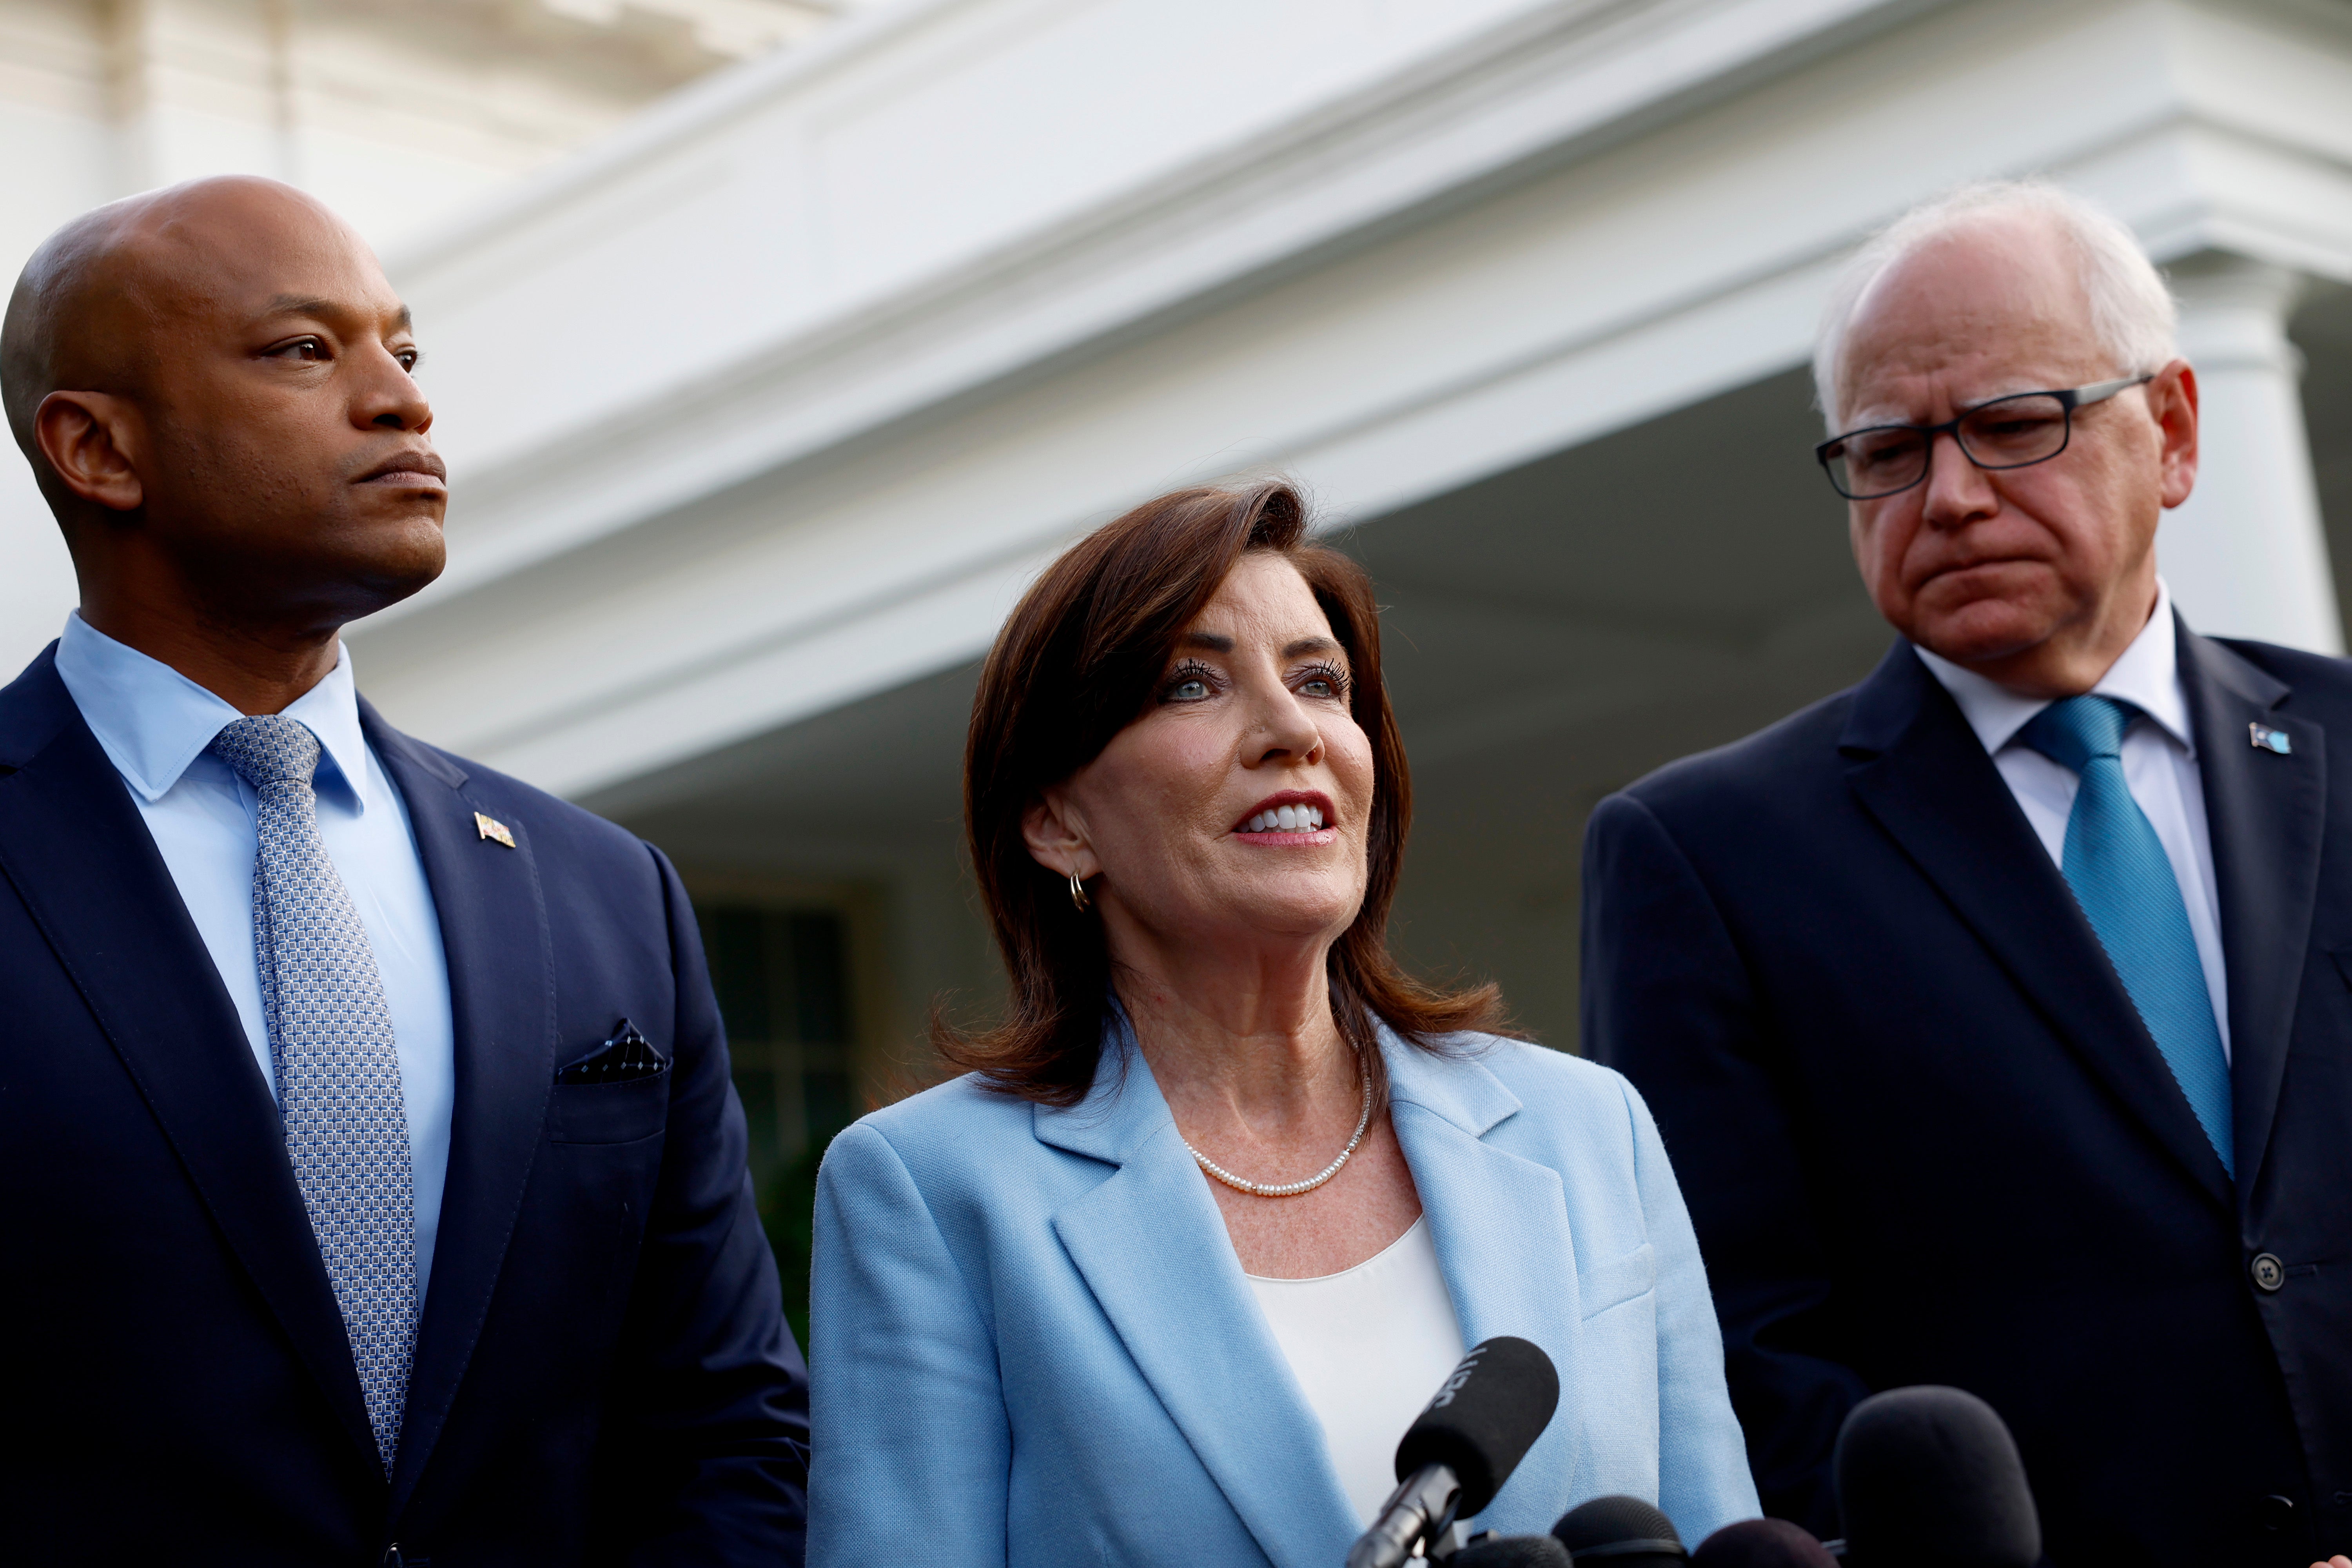 Democratic governors Wes Moore of Maryland, Kathy Hochul of New York and Tim Walz of Minnesota speak to reporters after meeting with President Joe Biden on July 3.